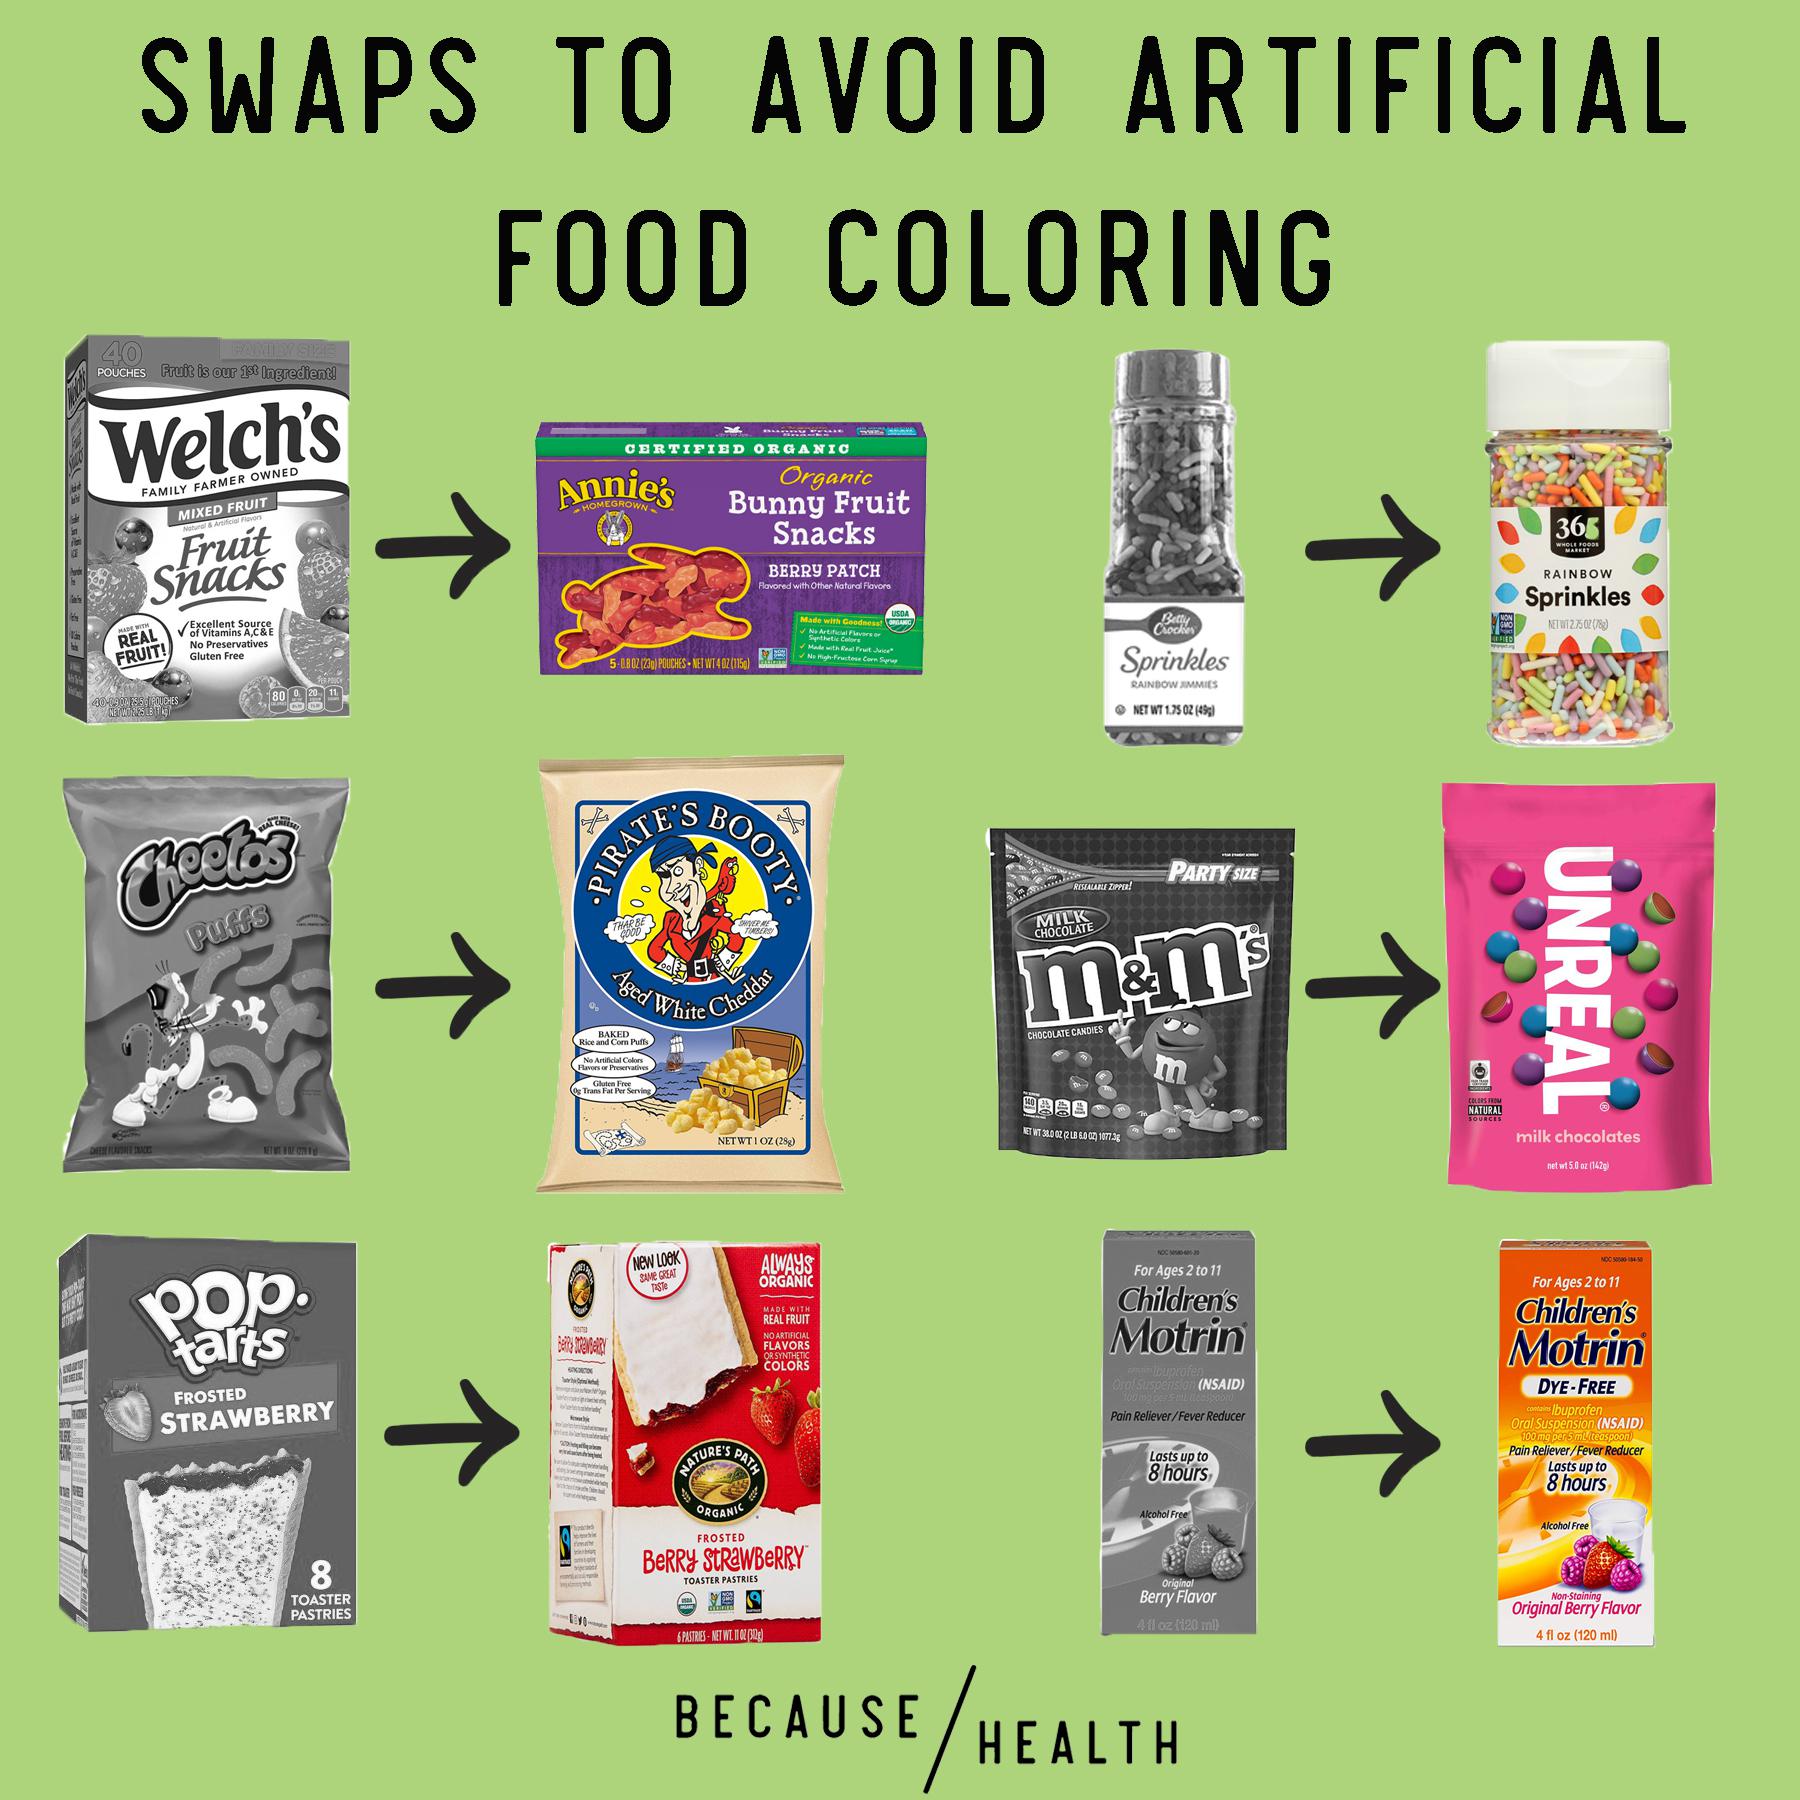 Swaps to Avoid Artificial Food Coloring - Center for Environmental